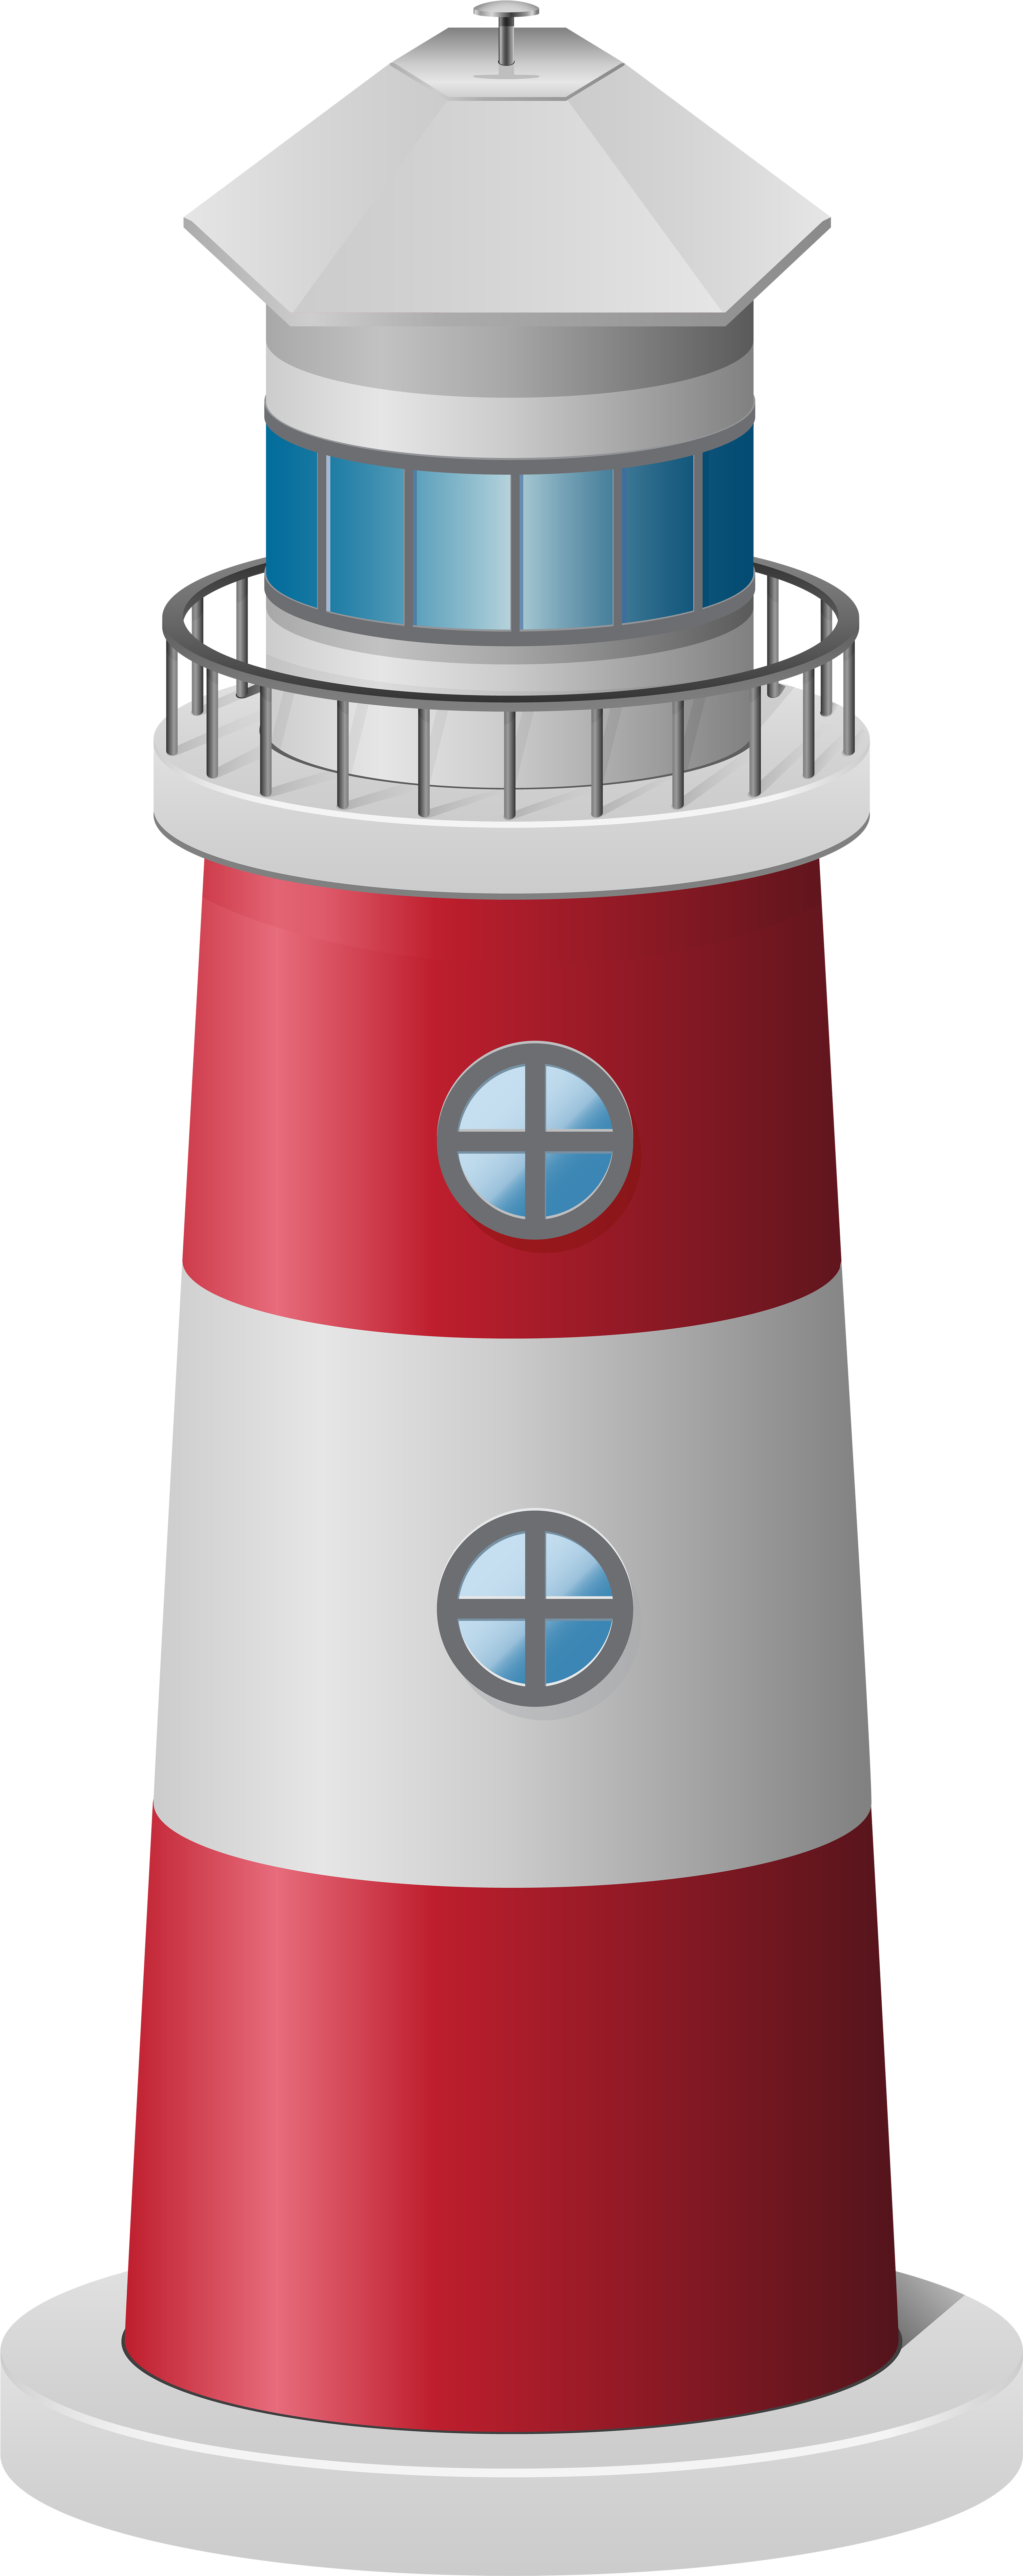 Download PNG image - Lighthouse PNG 